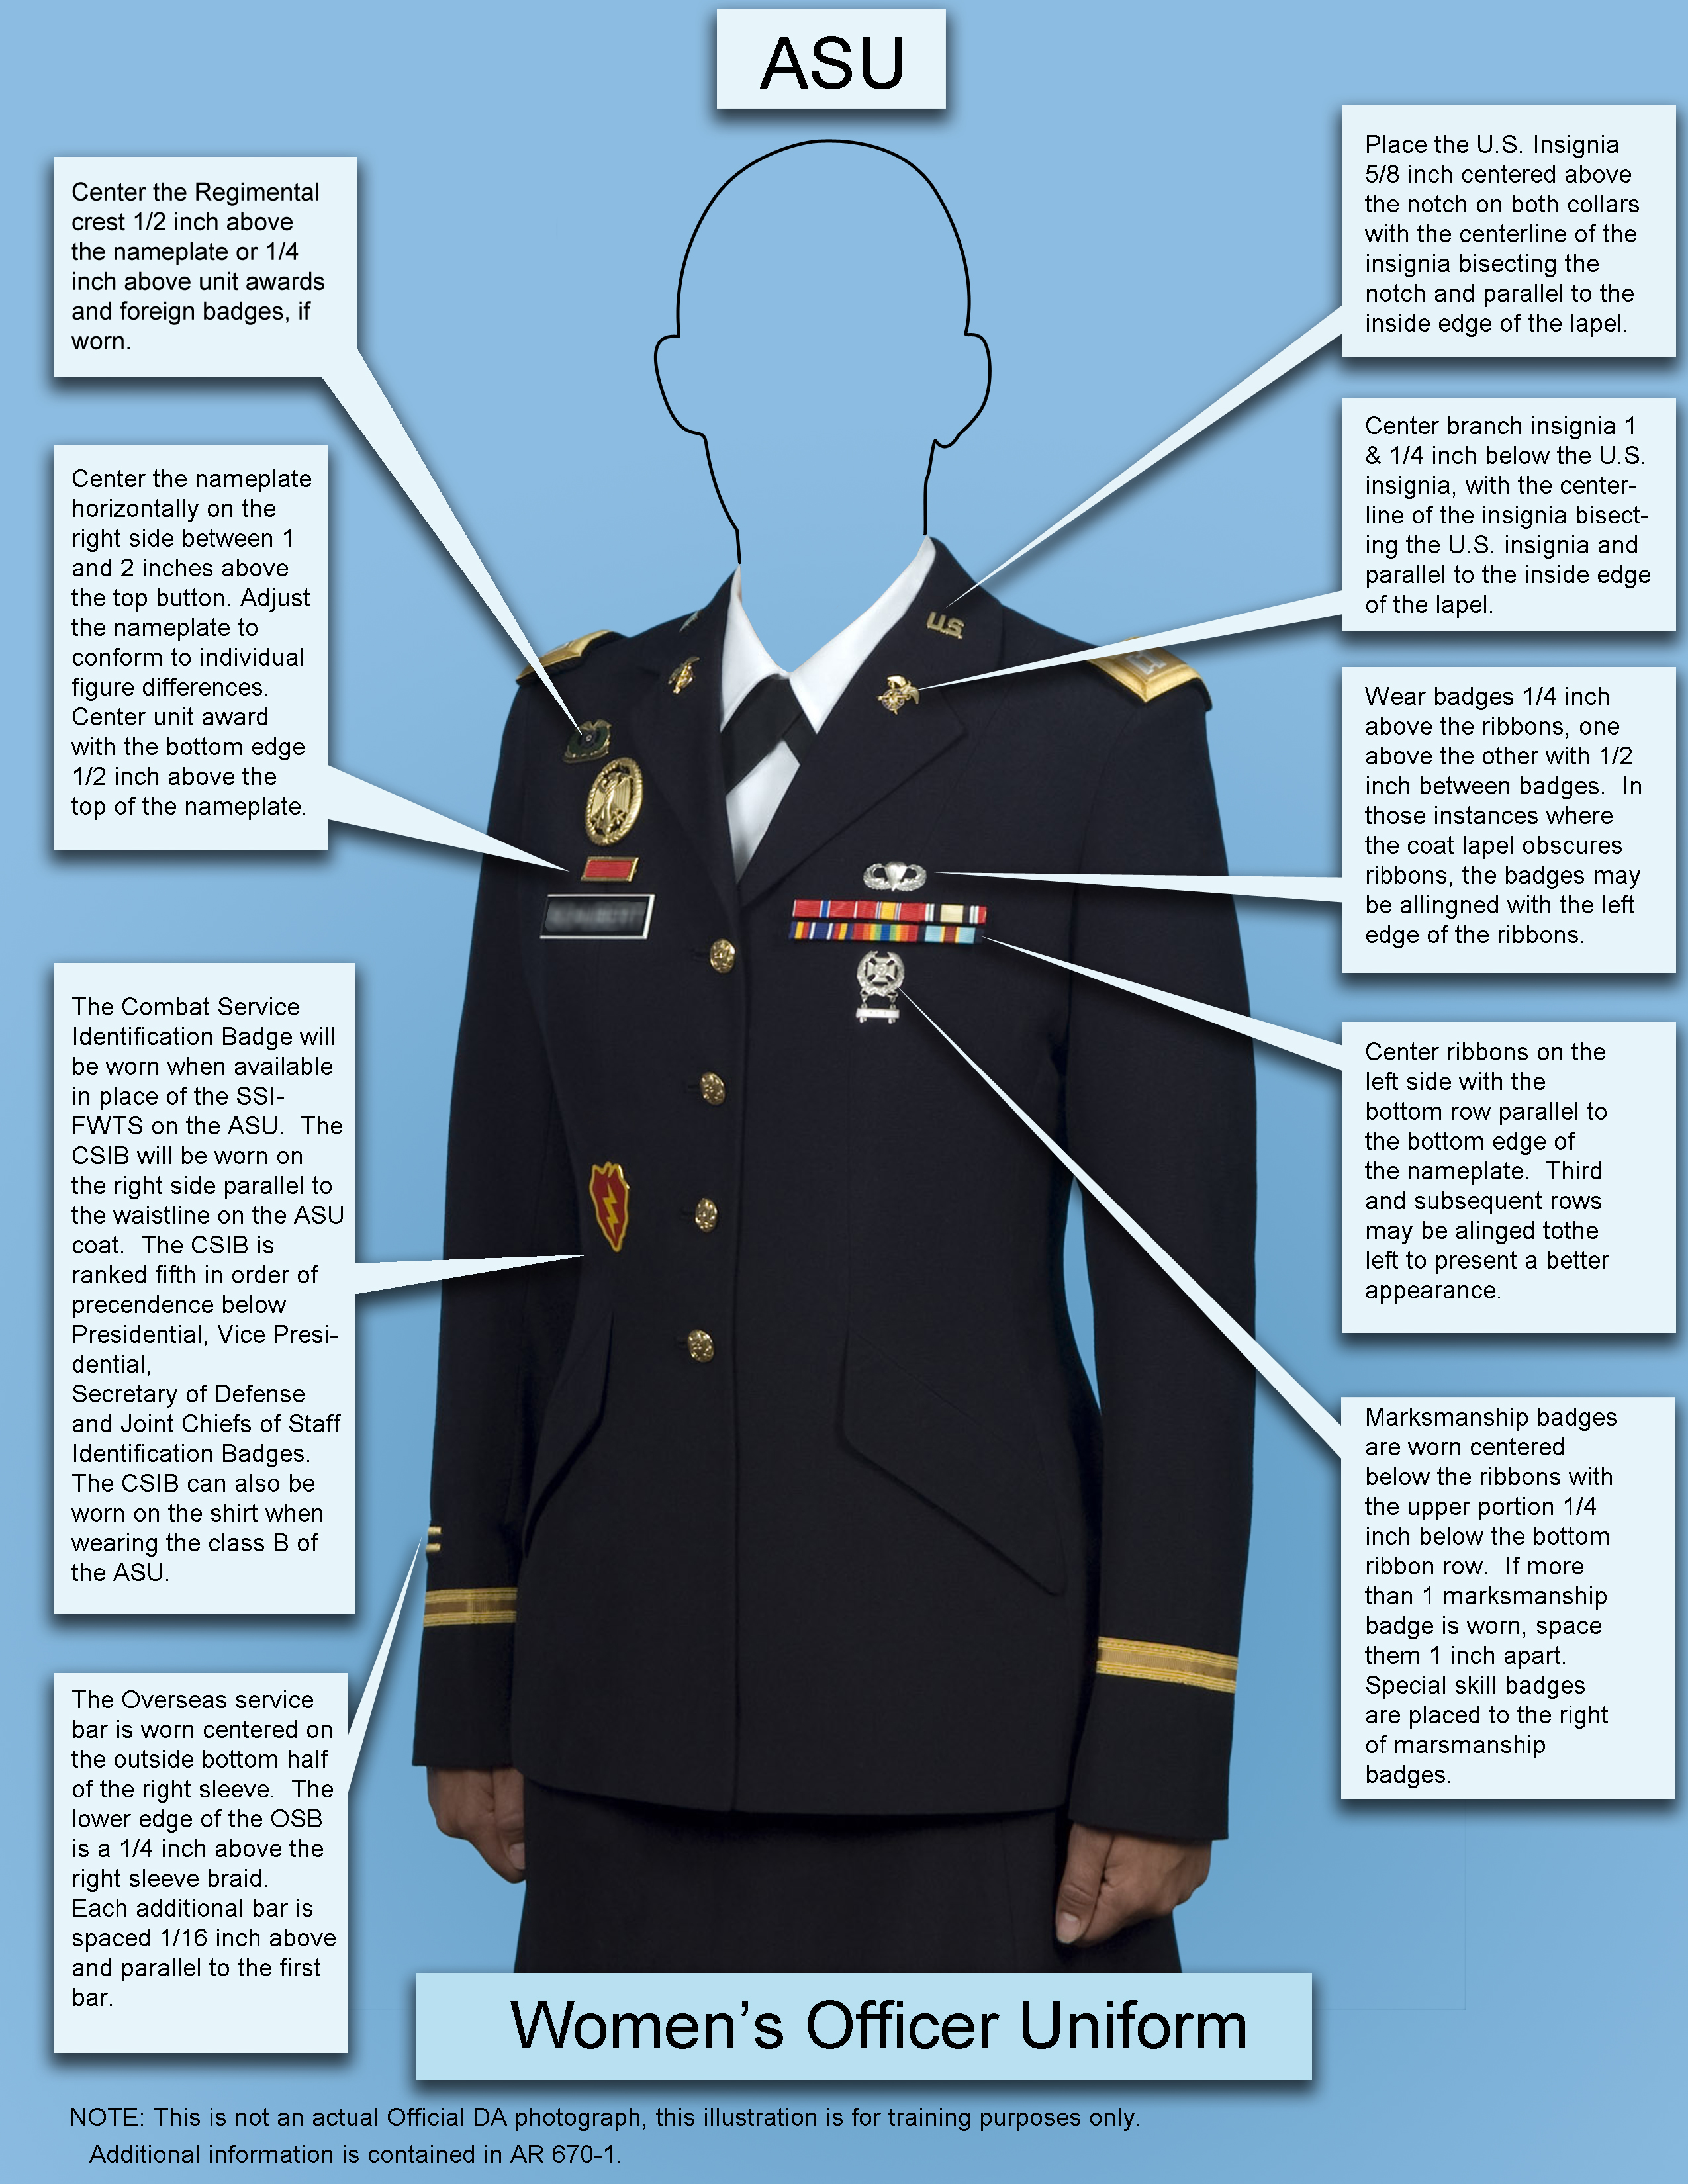 Army Service Uniform Guide Poster Pictures to Pin on Pinterest PinsDaddy